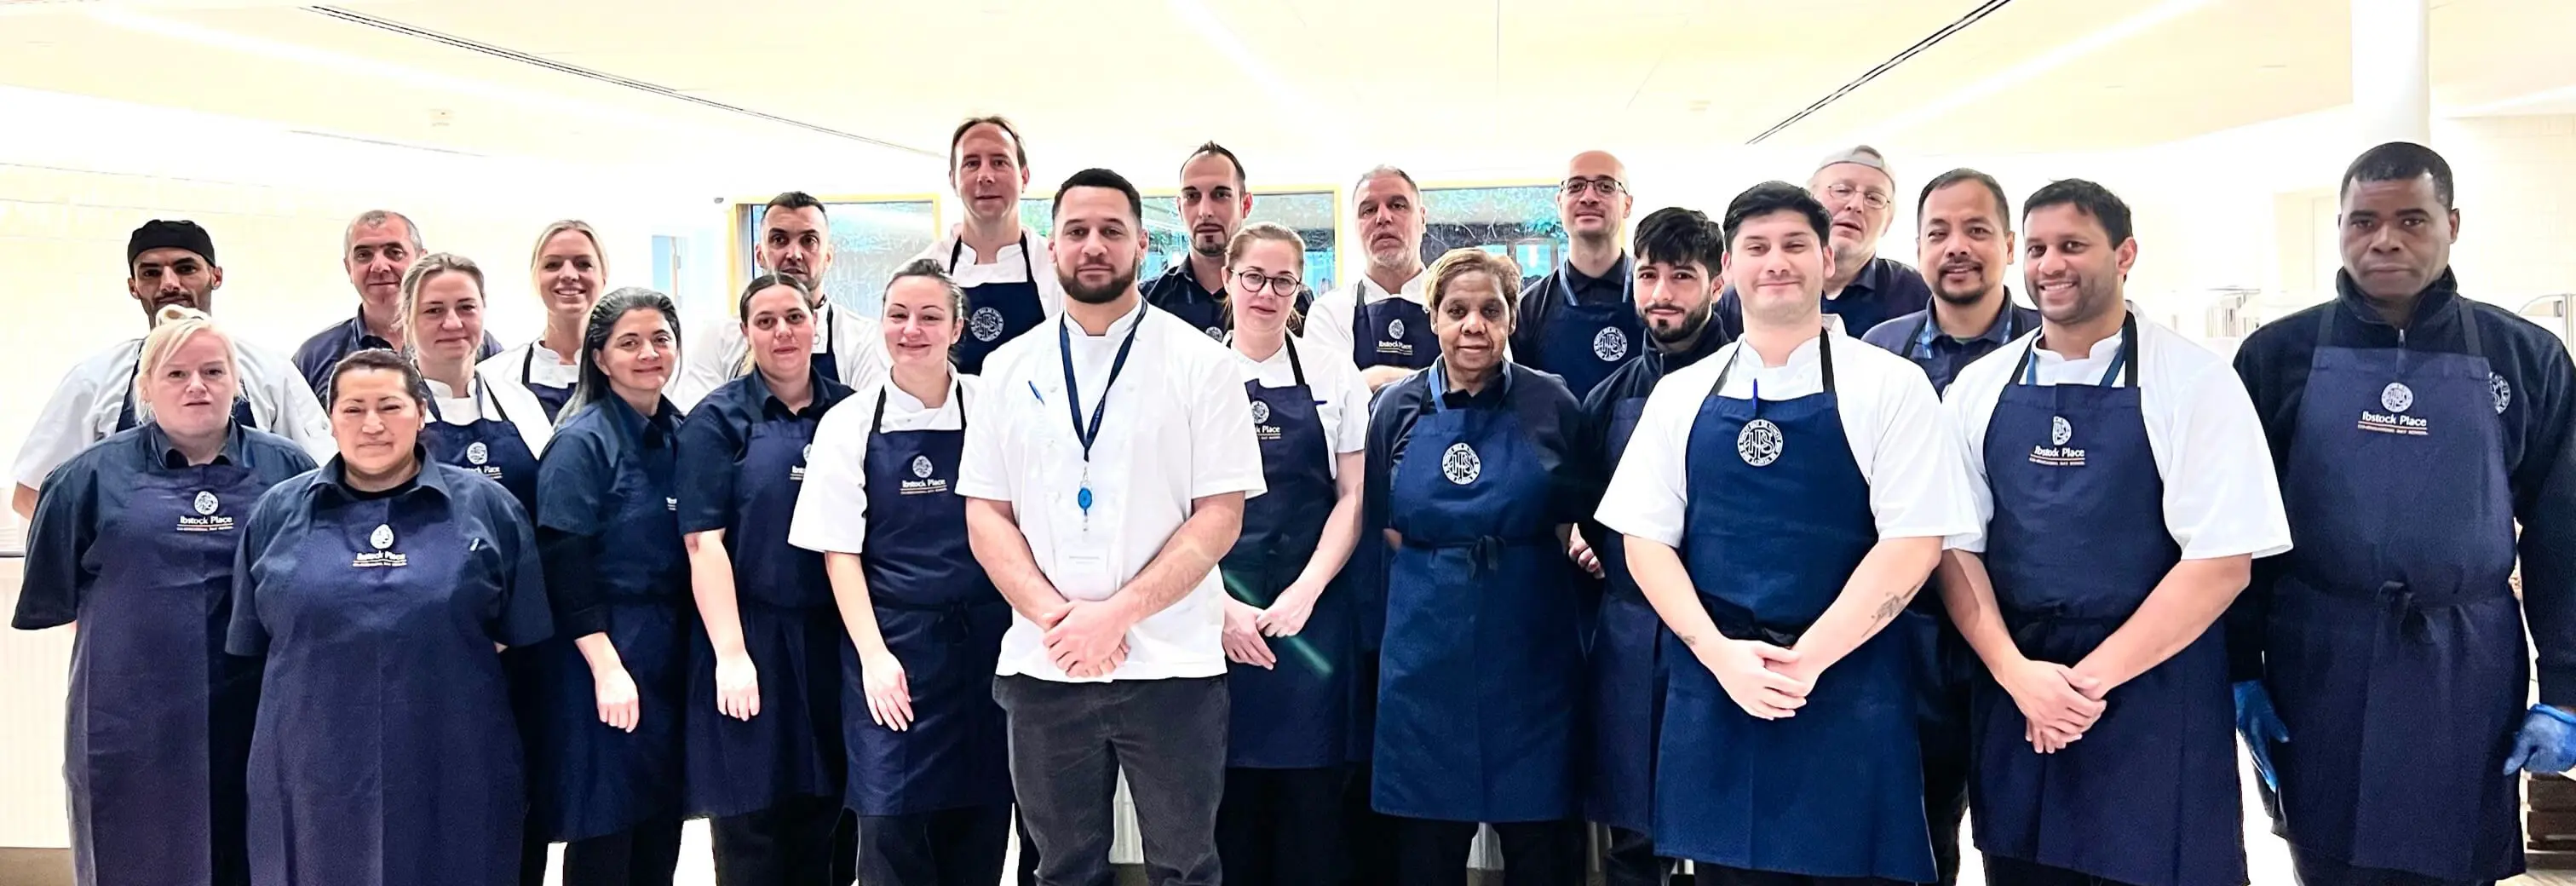 The catering team that deliver healthy eating options for the pupils at Ibstock Place School, a private school in Roehampton